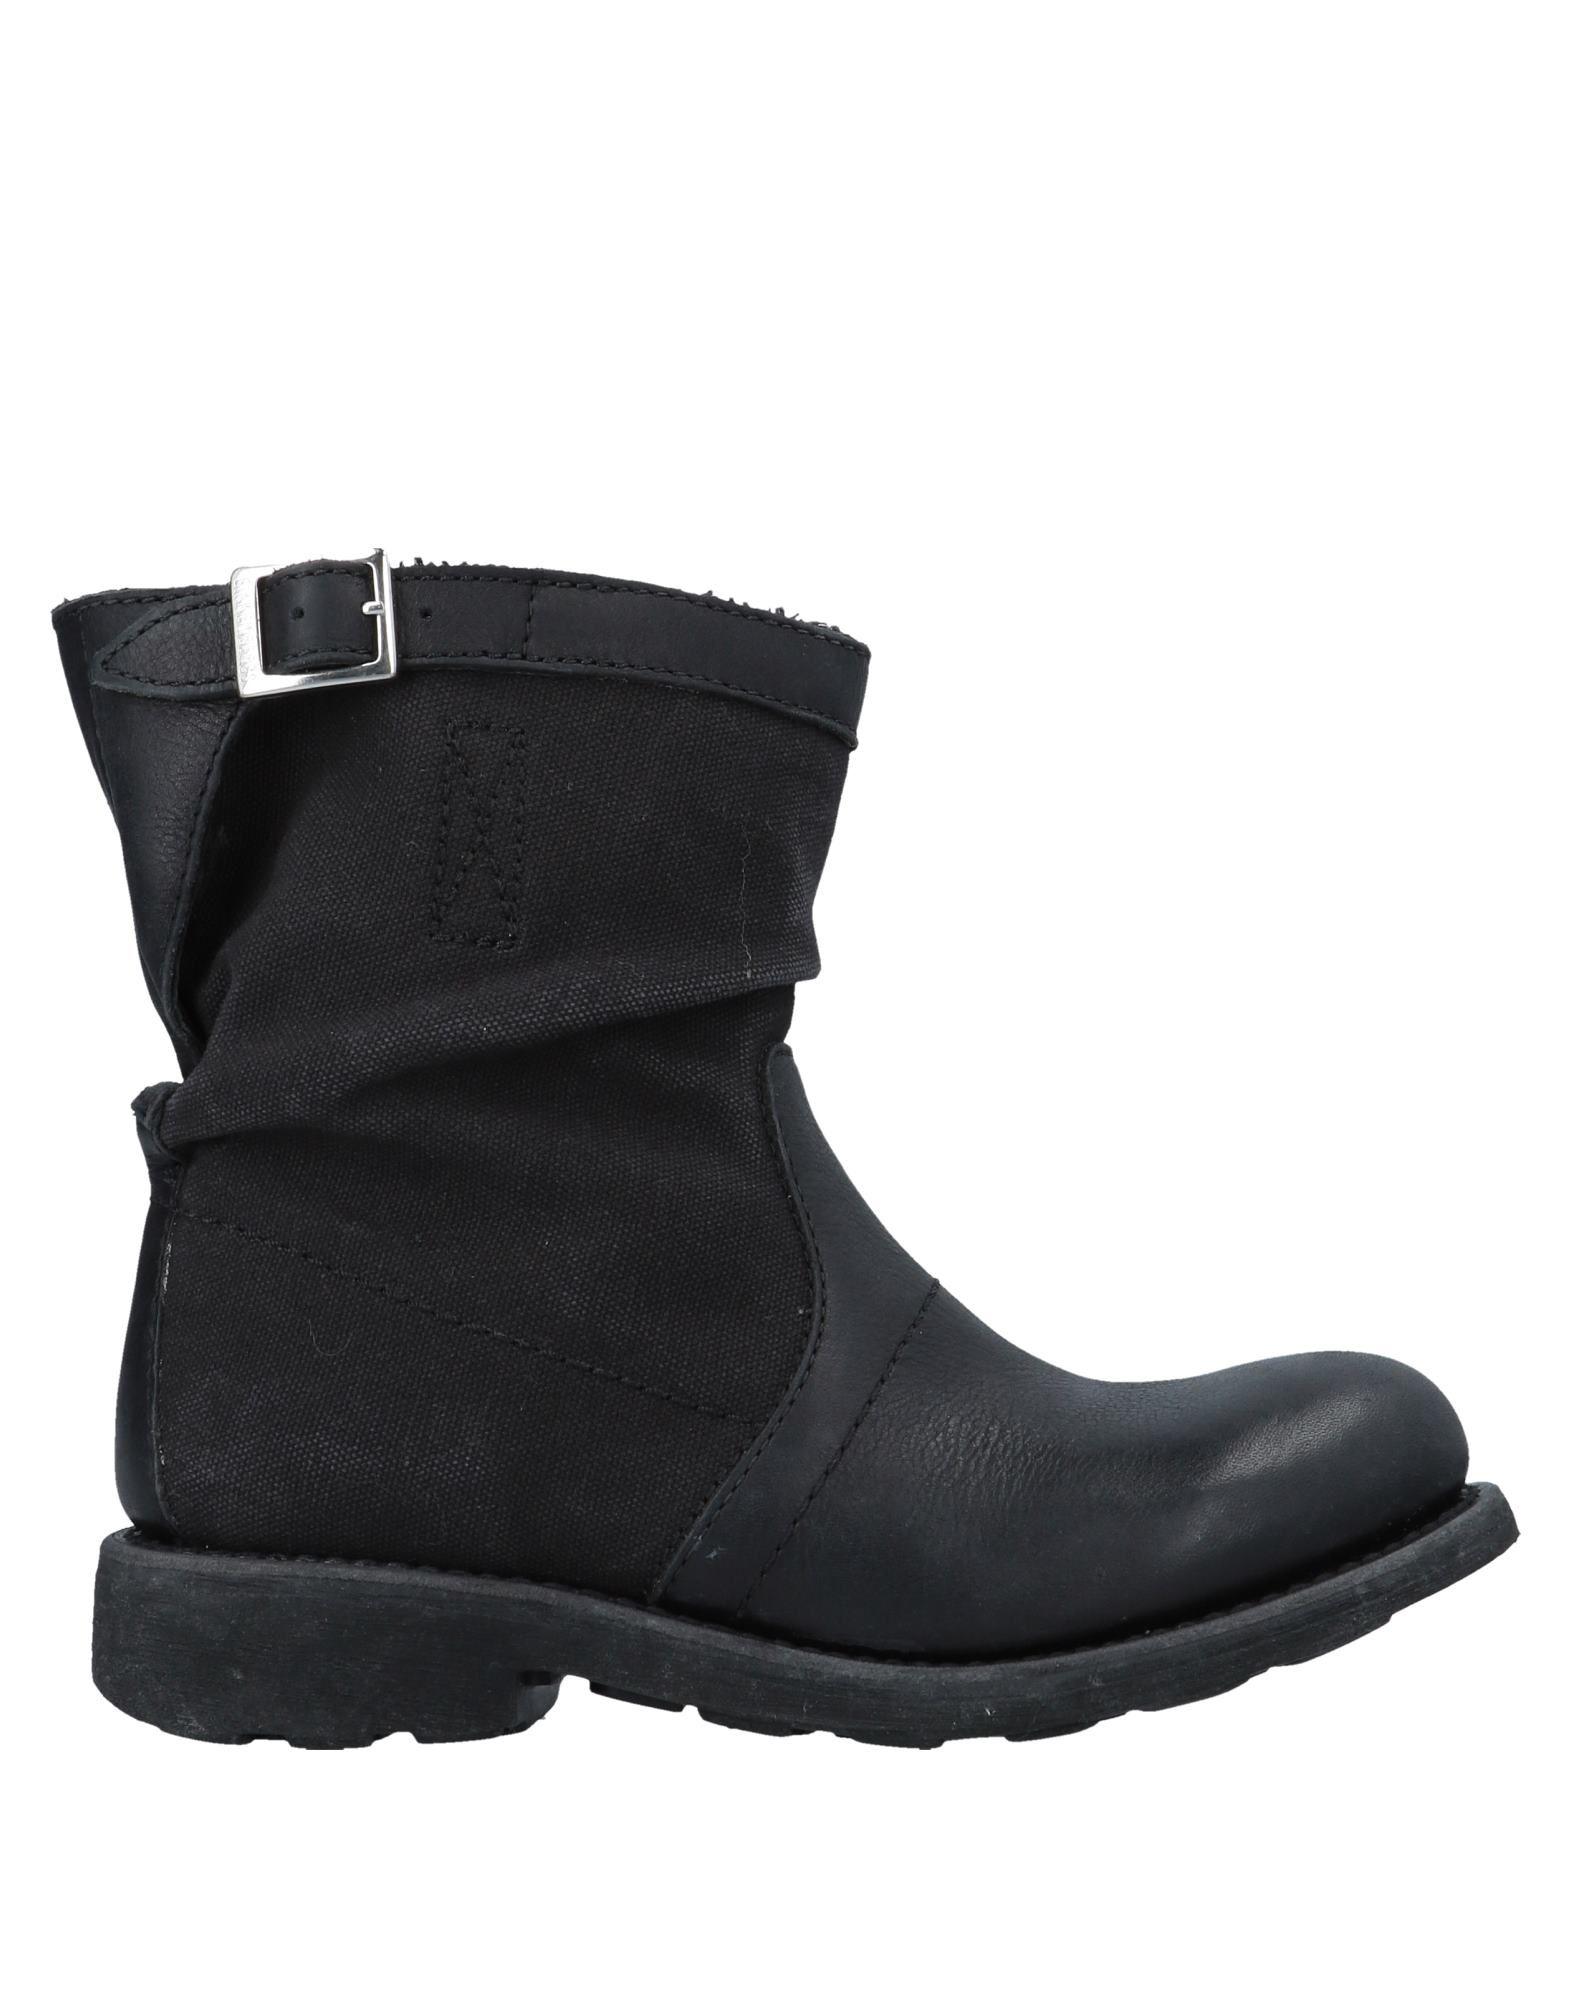 Bikkembergs Canvas Ankle Boots in Black - Lyst